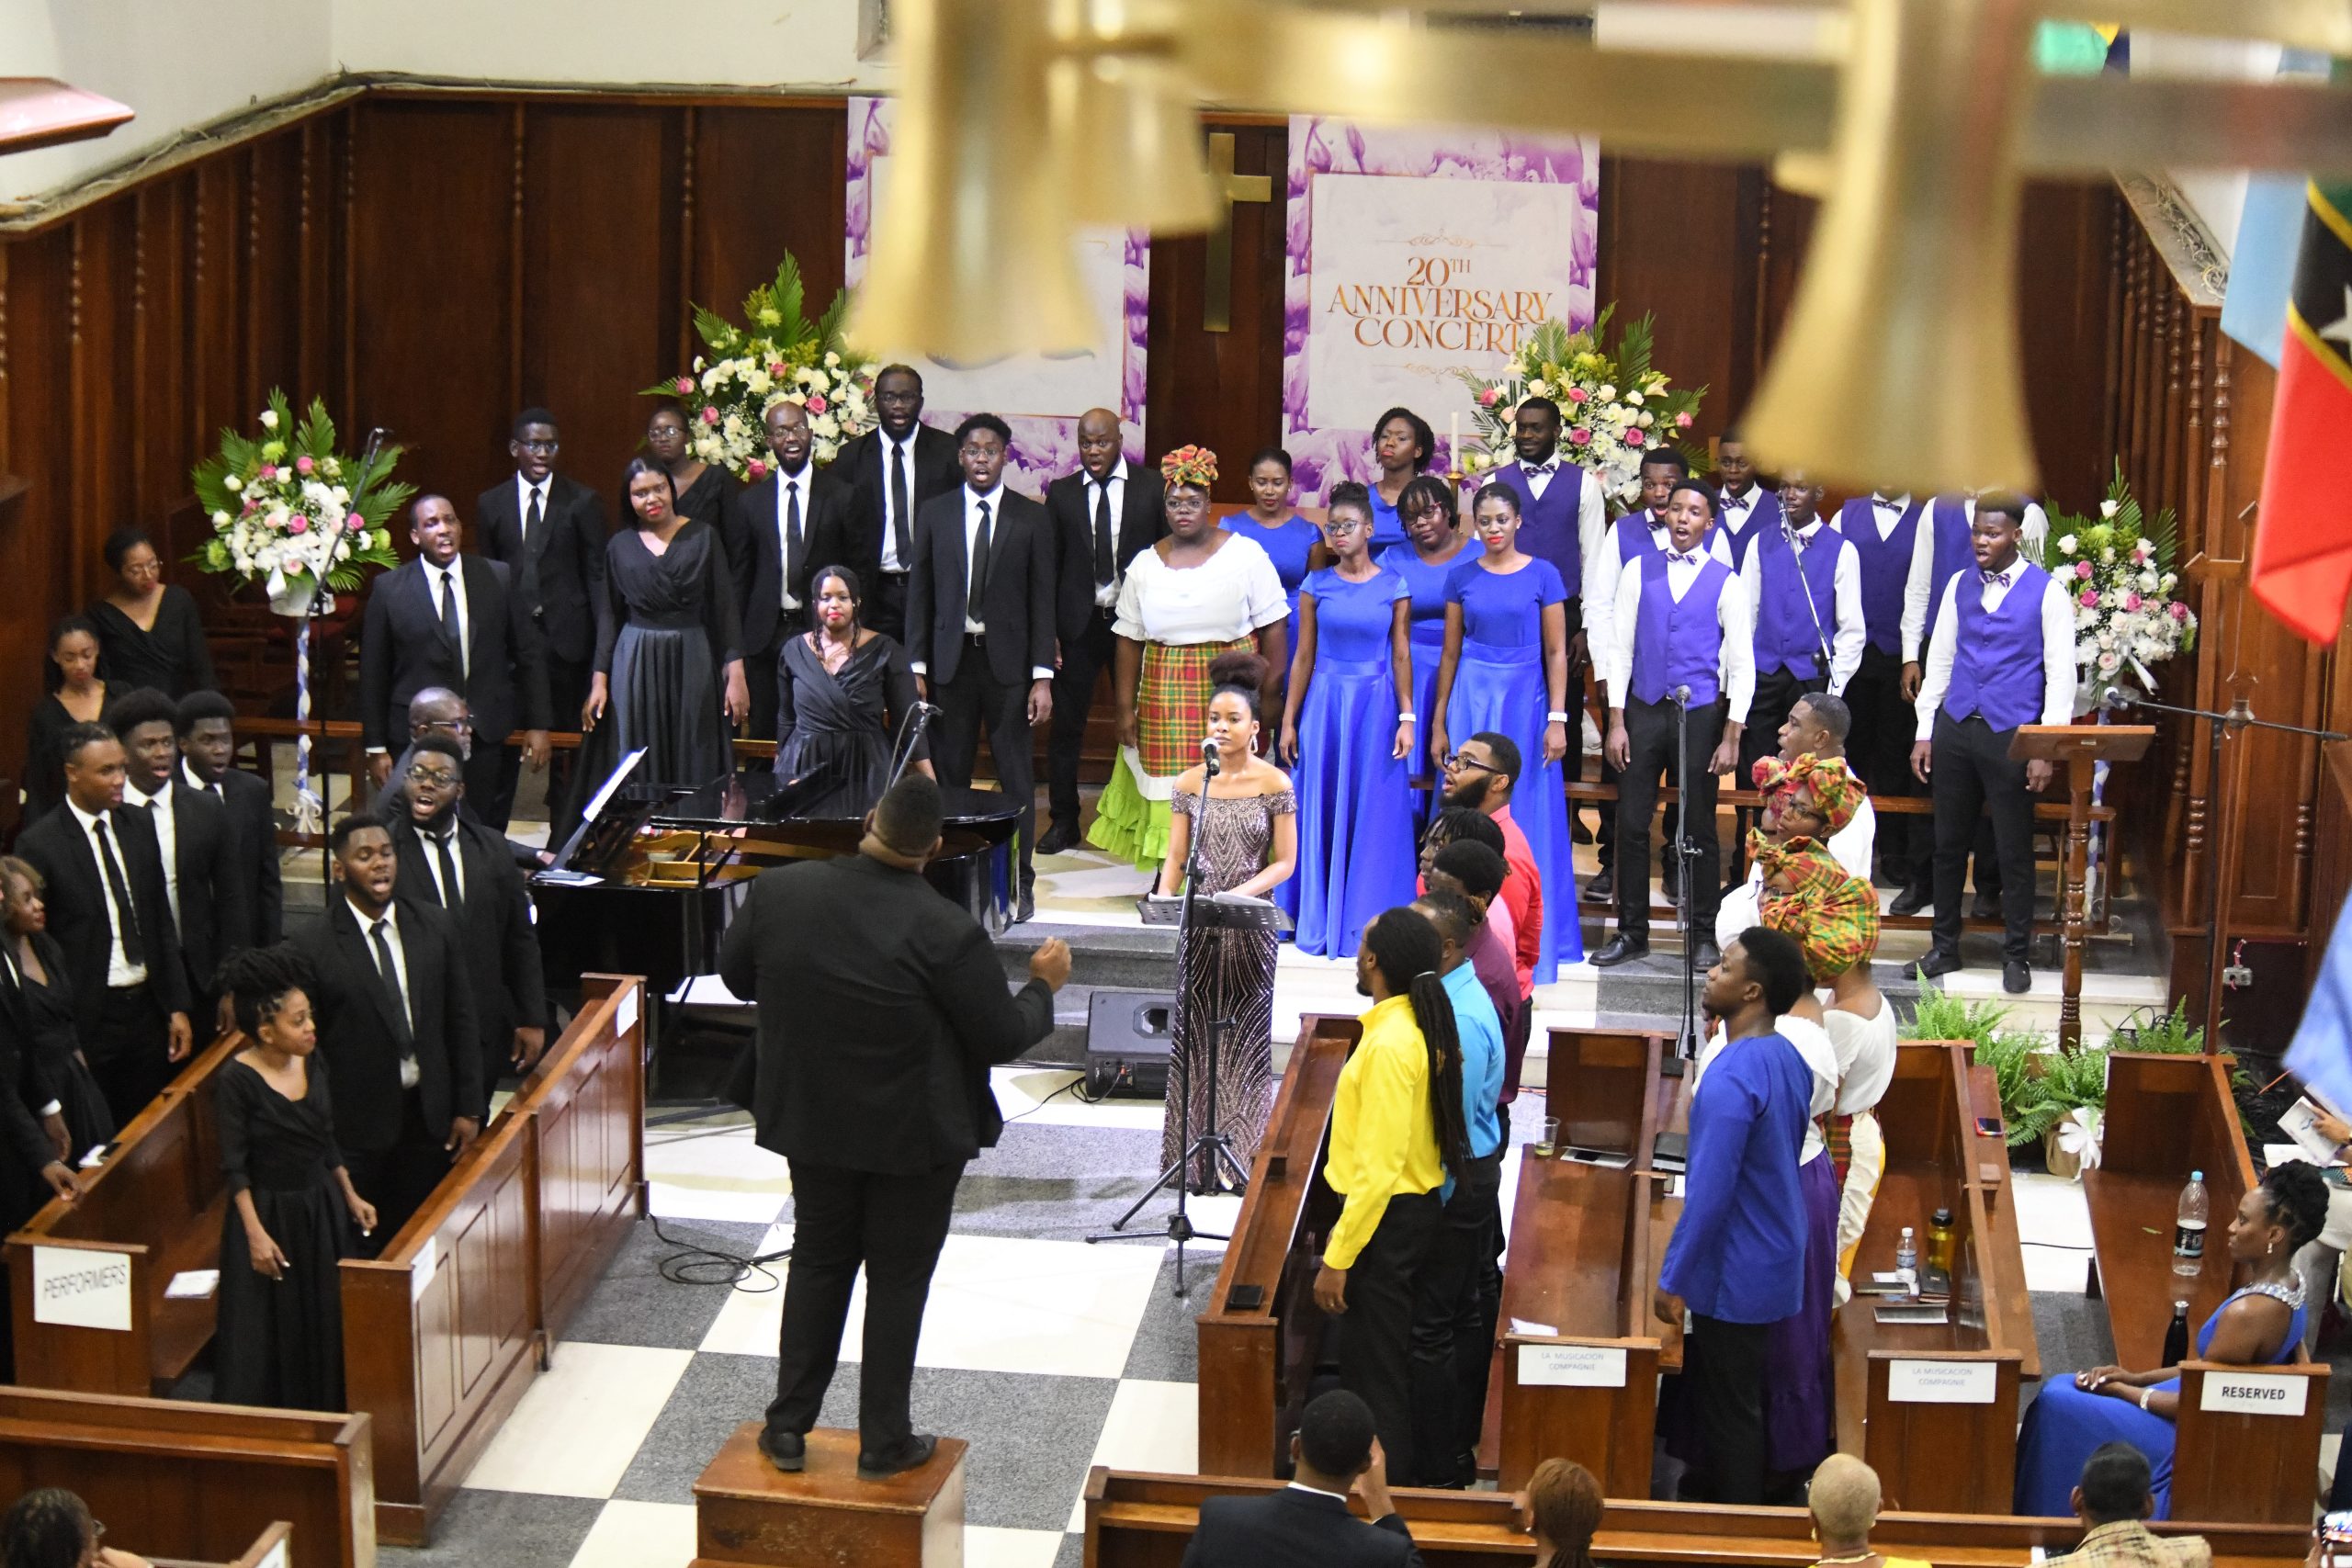 The combined choir delivers the closing performance of Noel Dexter’s Psalm 27.